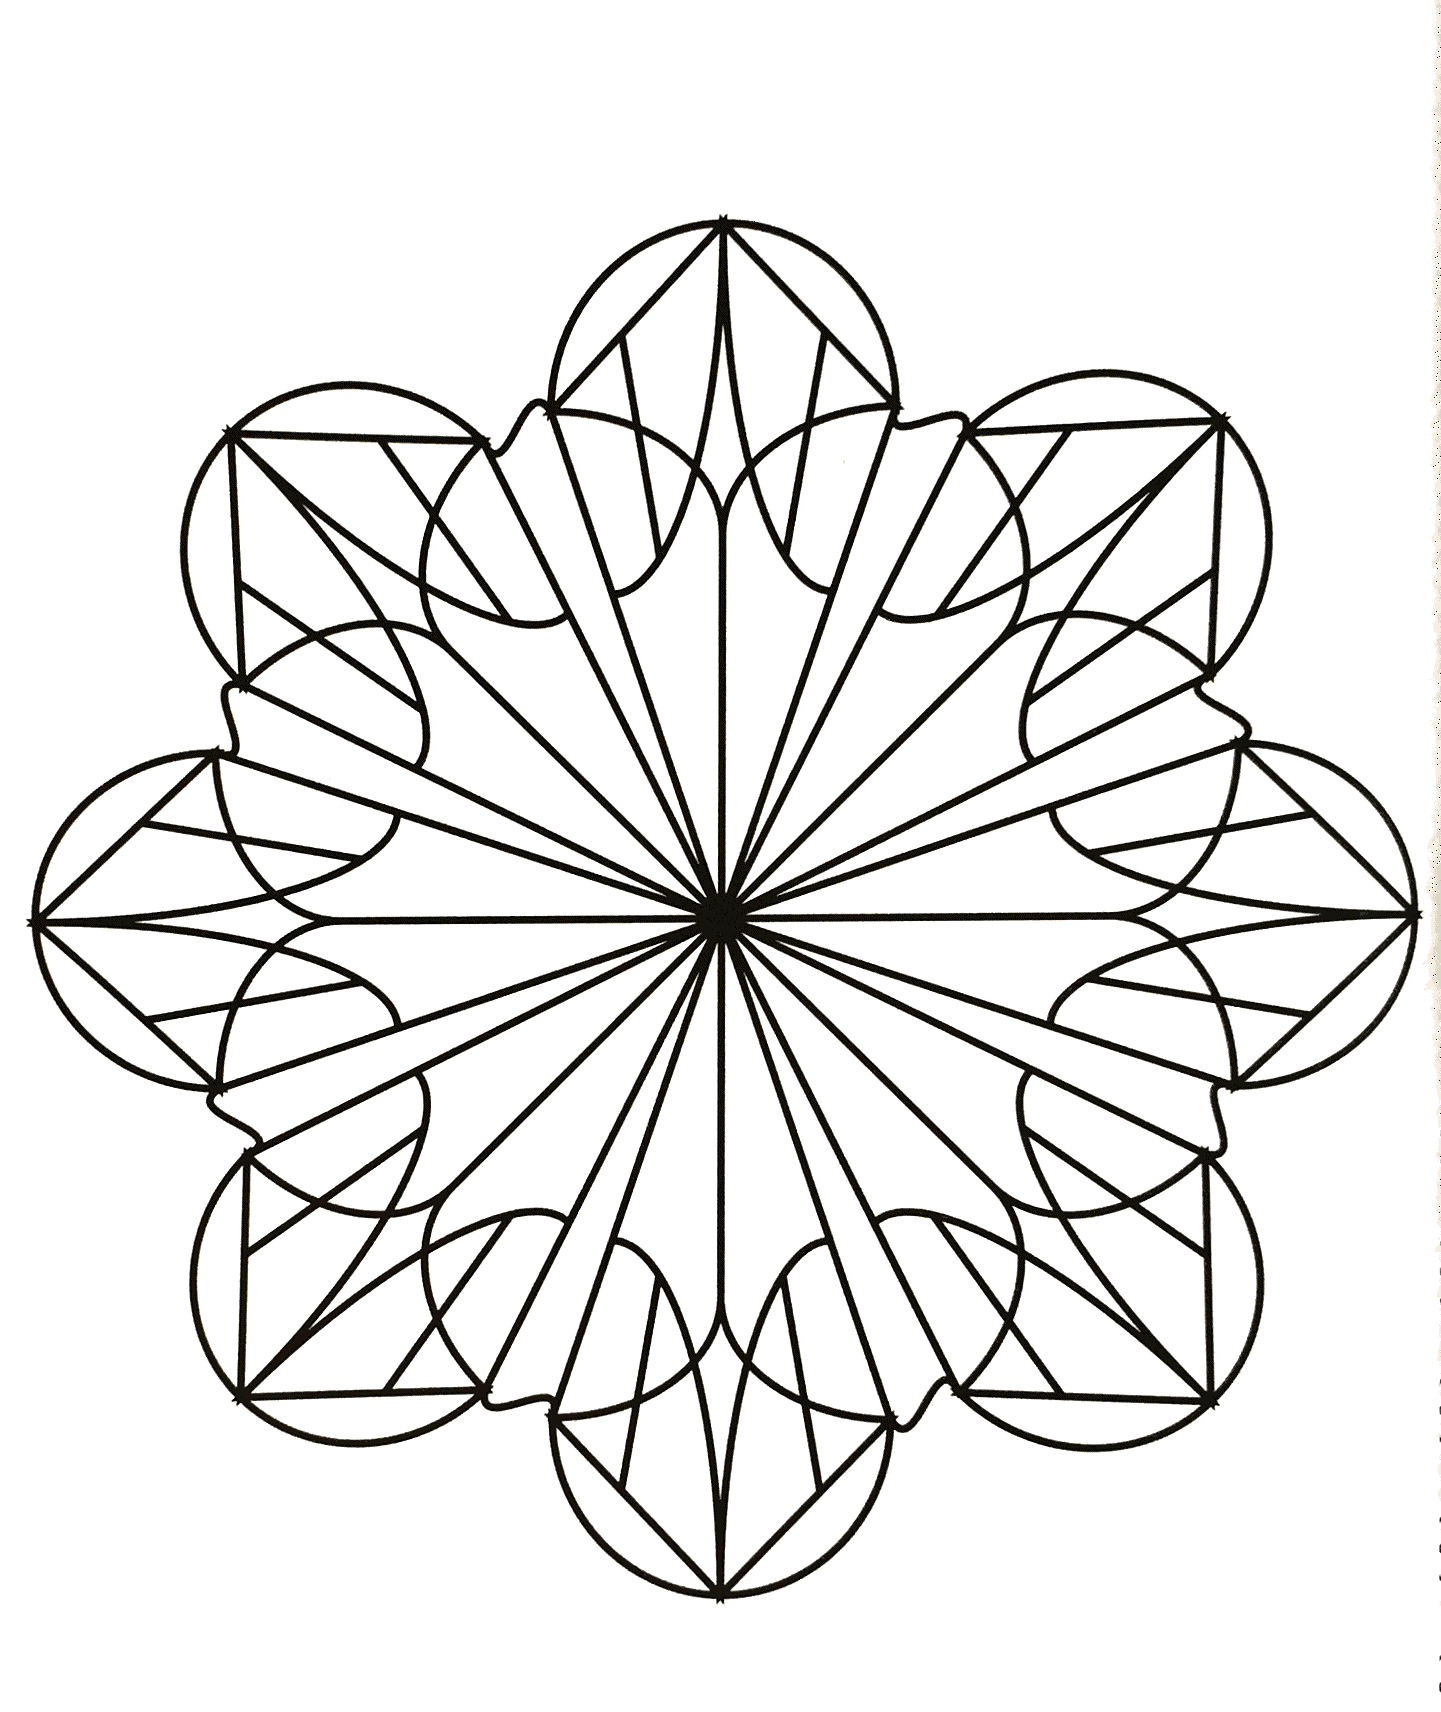 Many small patterns and little details for a Mandala coloring page of good quality. This design has eight rounded ends. Still your mind : this step is essential to get the most out of coloring to reduce your stress